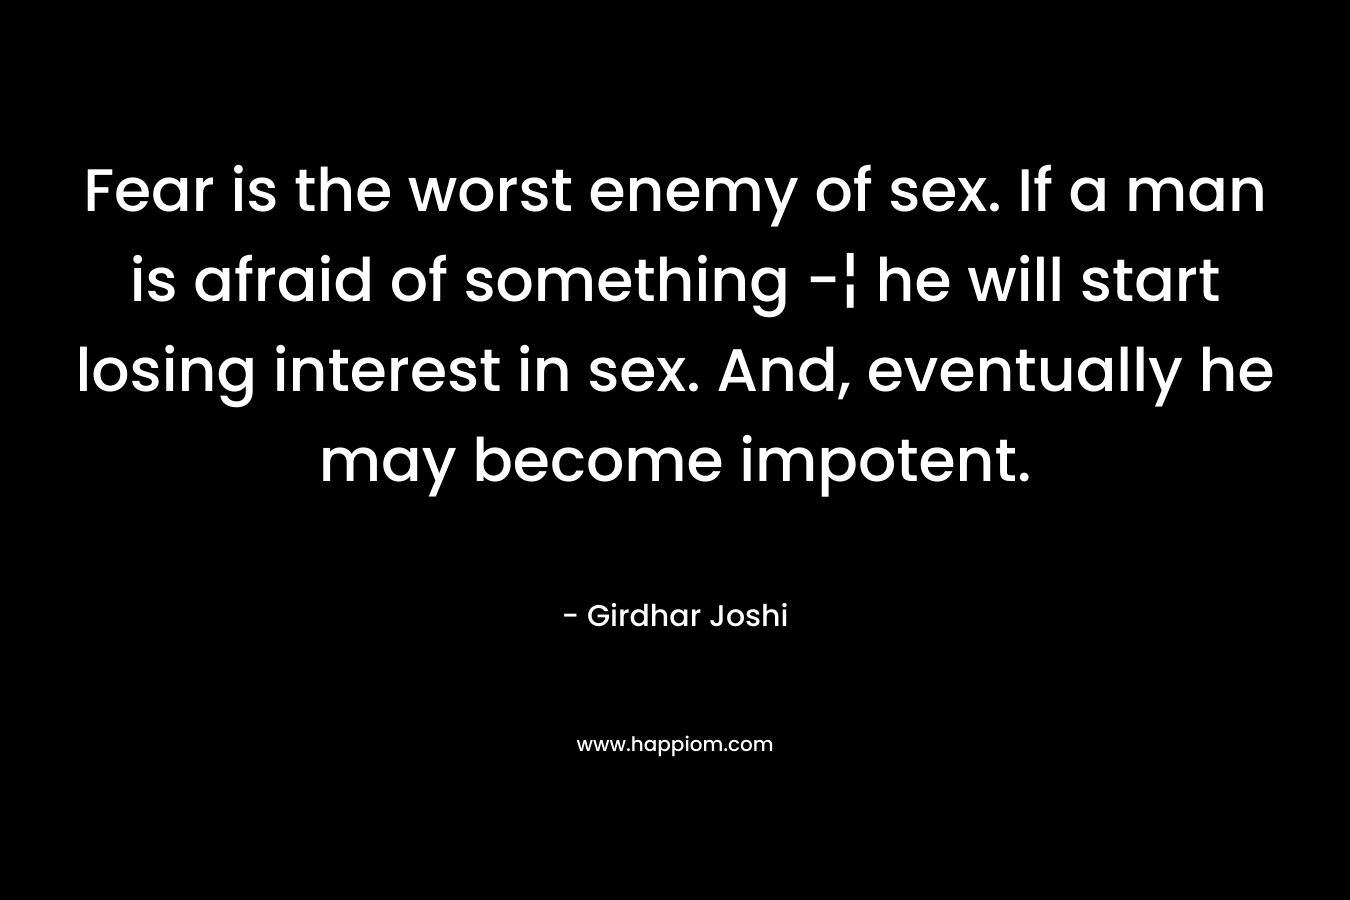 Fear is the worst enemy of sex. If a man is afraid of something -¦ he will start losing interest in sex. And, eventually he may become impotent.